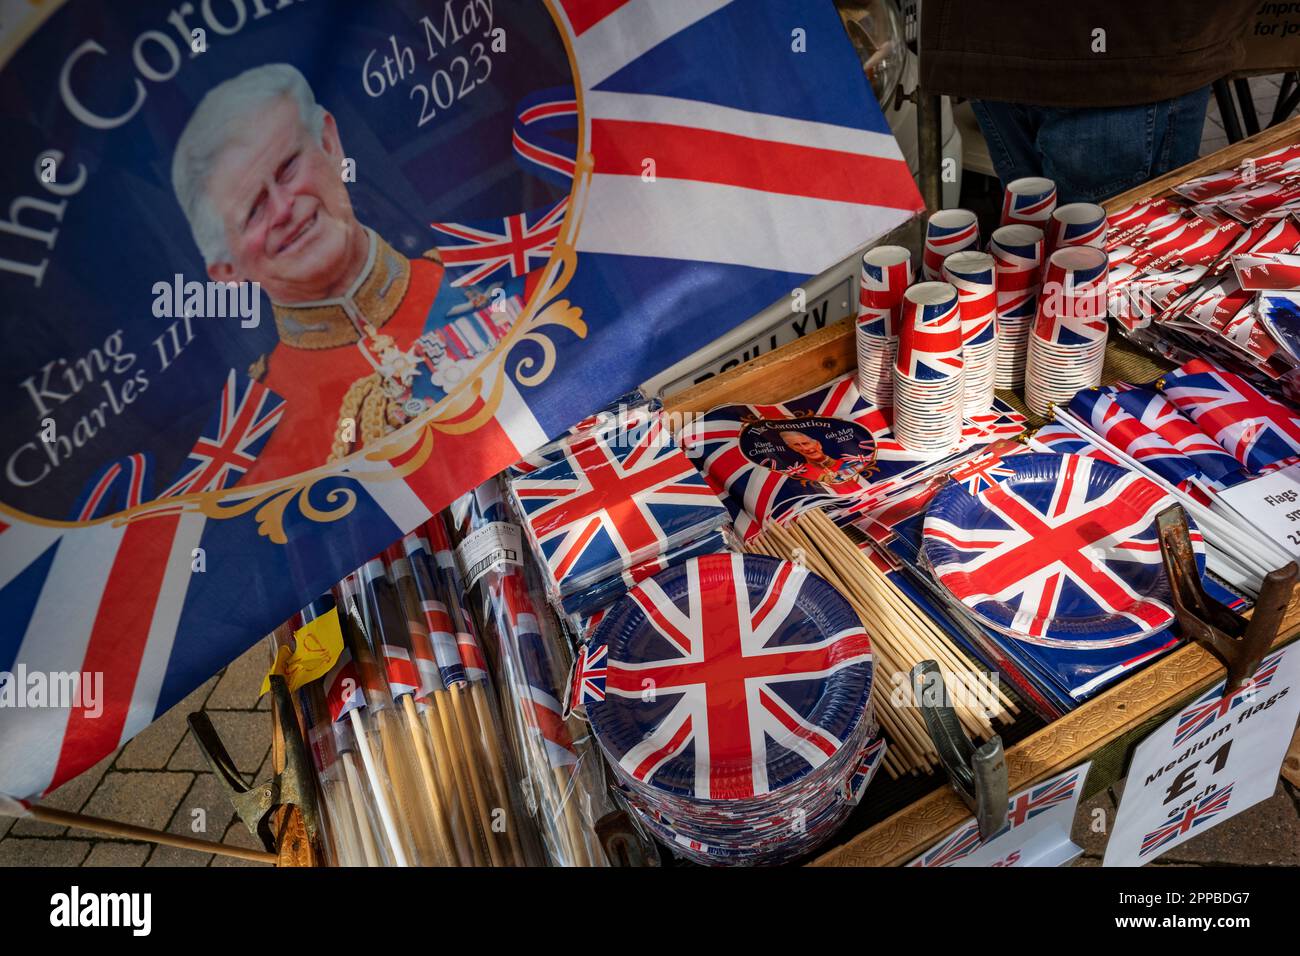 King Charles III Coronation Memorabilia on sale April-May 2023 Commemorative Coronation Flags and bunting for sale prior to the Coronation on on a Saf Stock Photo